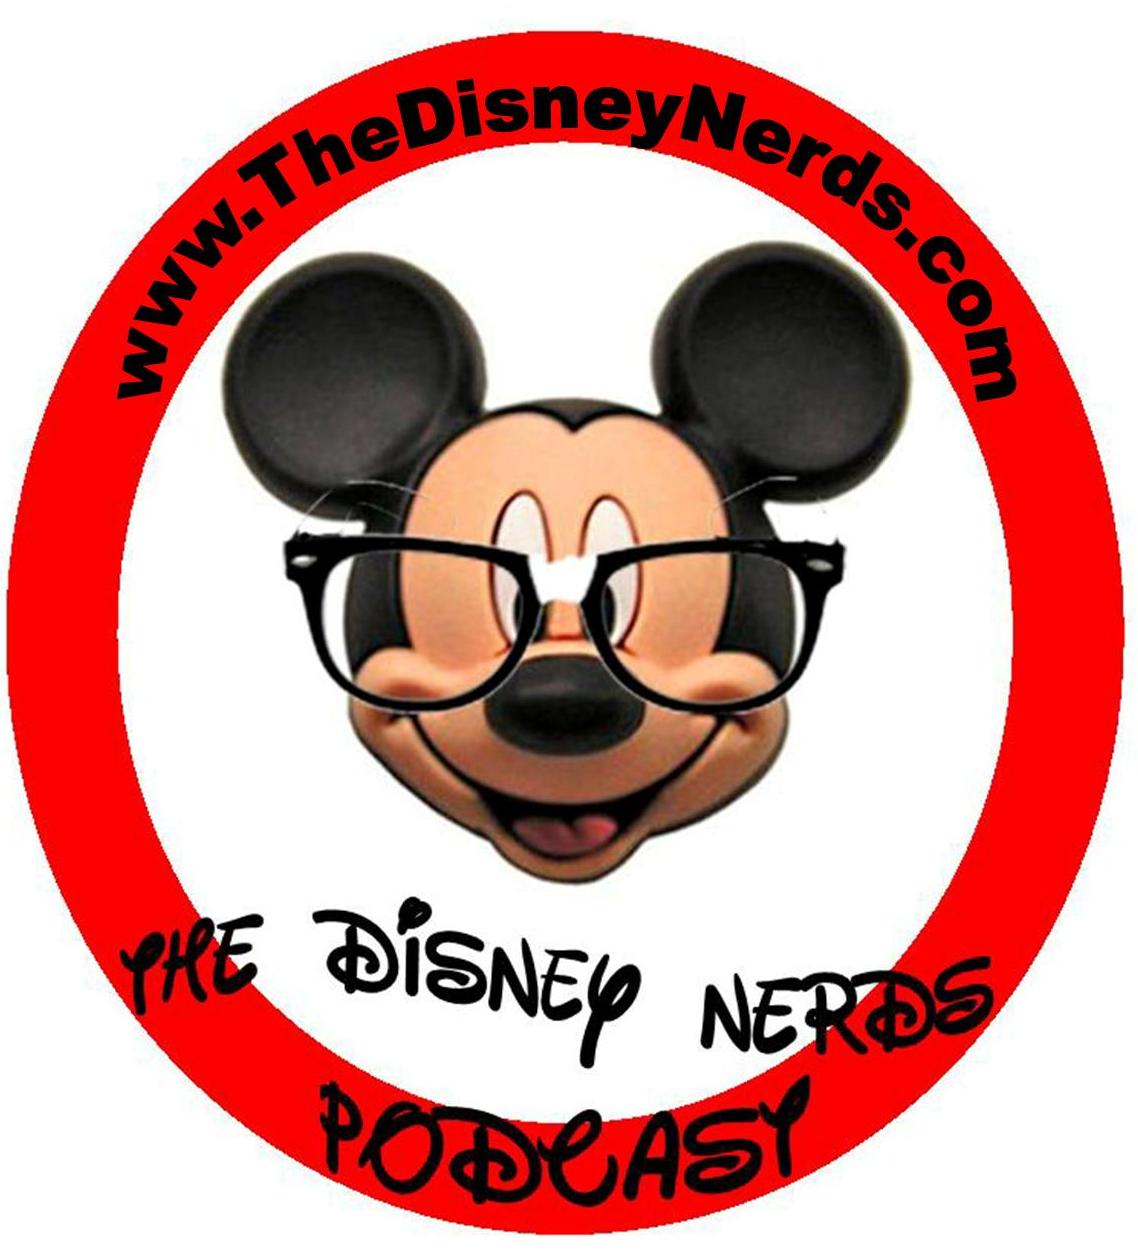 Show # 37 of the Disney Nerds Podcast